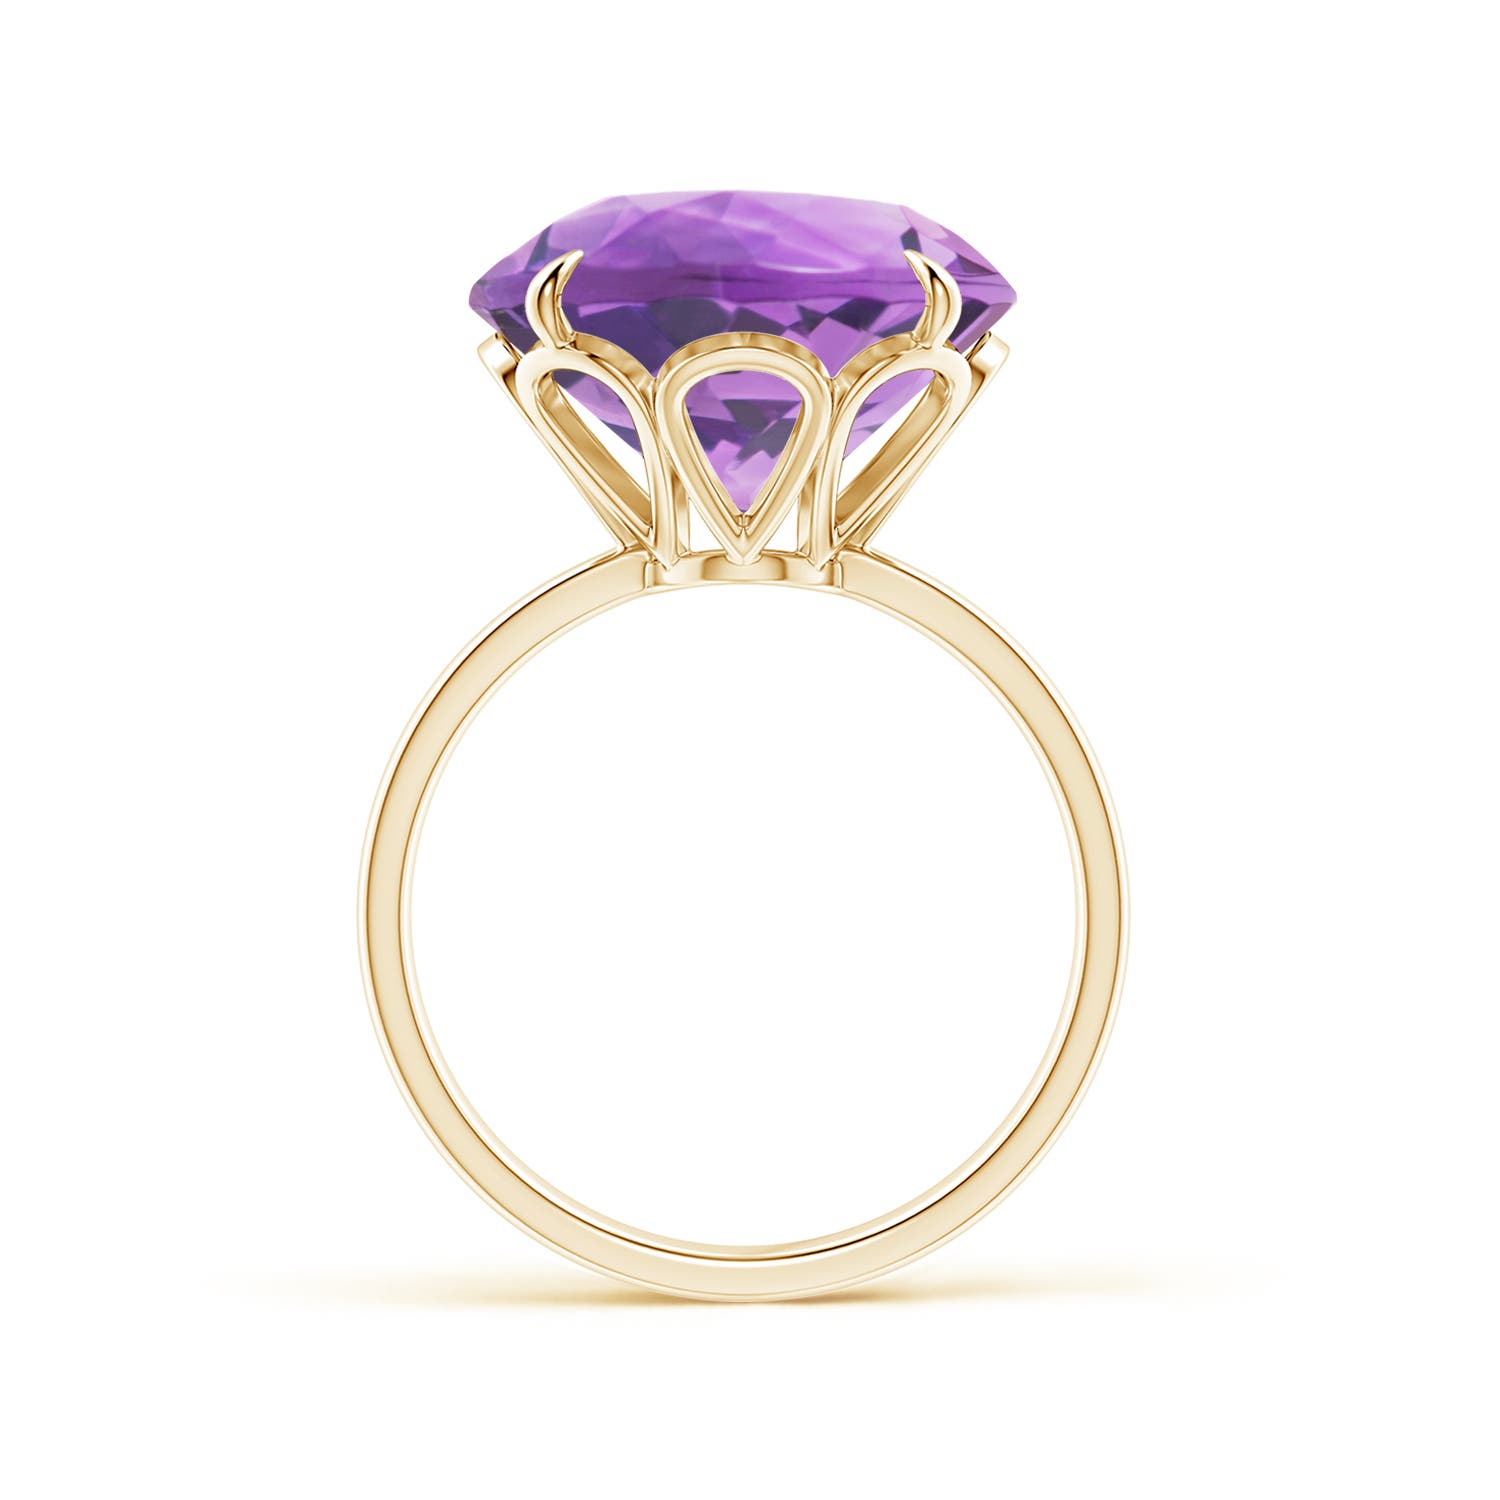 A- Amethyst / 8.5 CT / 14 KT Yellow Gold